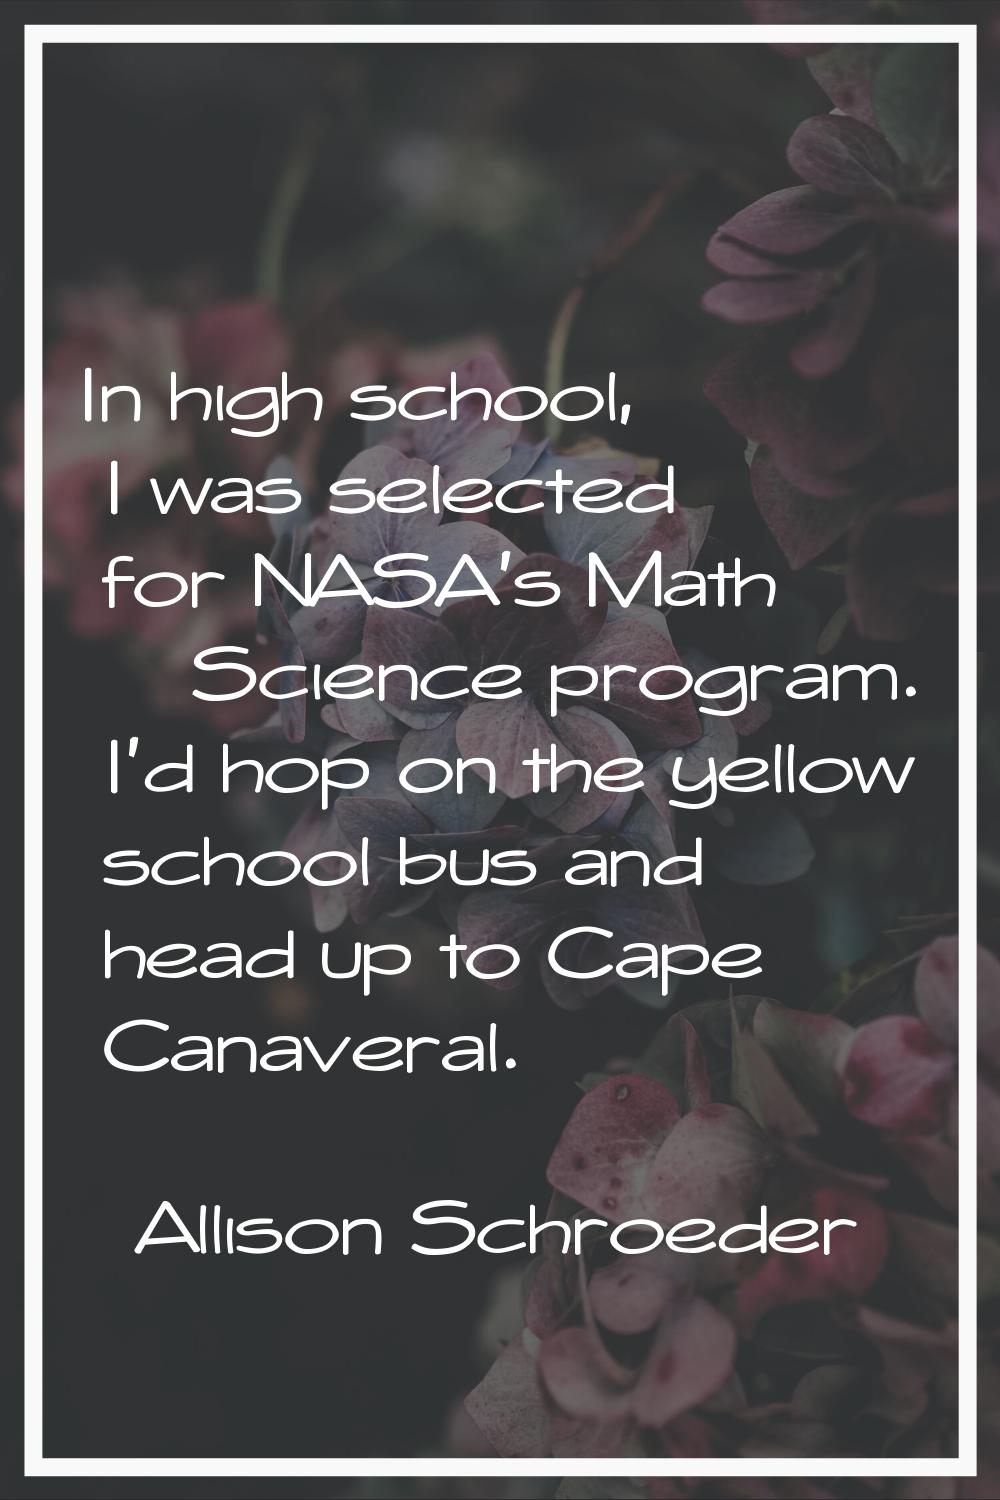 In high school, I was selected for NASA's Math & Science program. I'd hop on the yellow school bus 